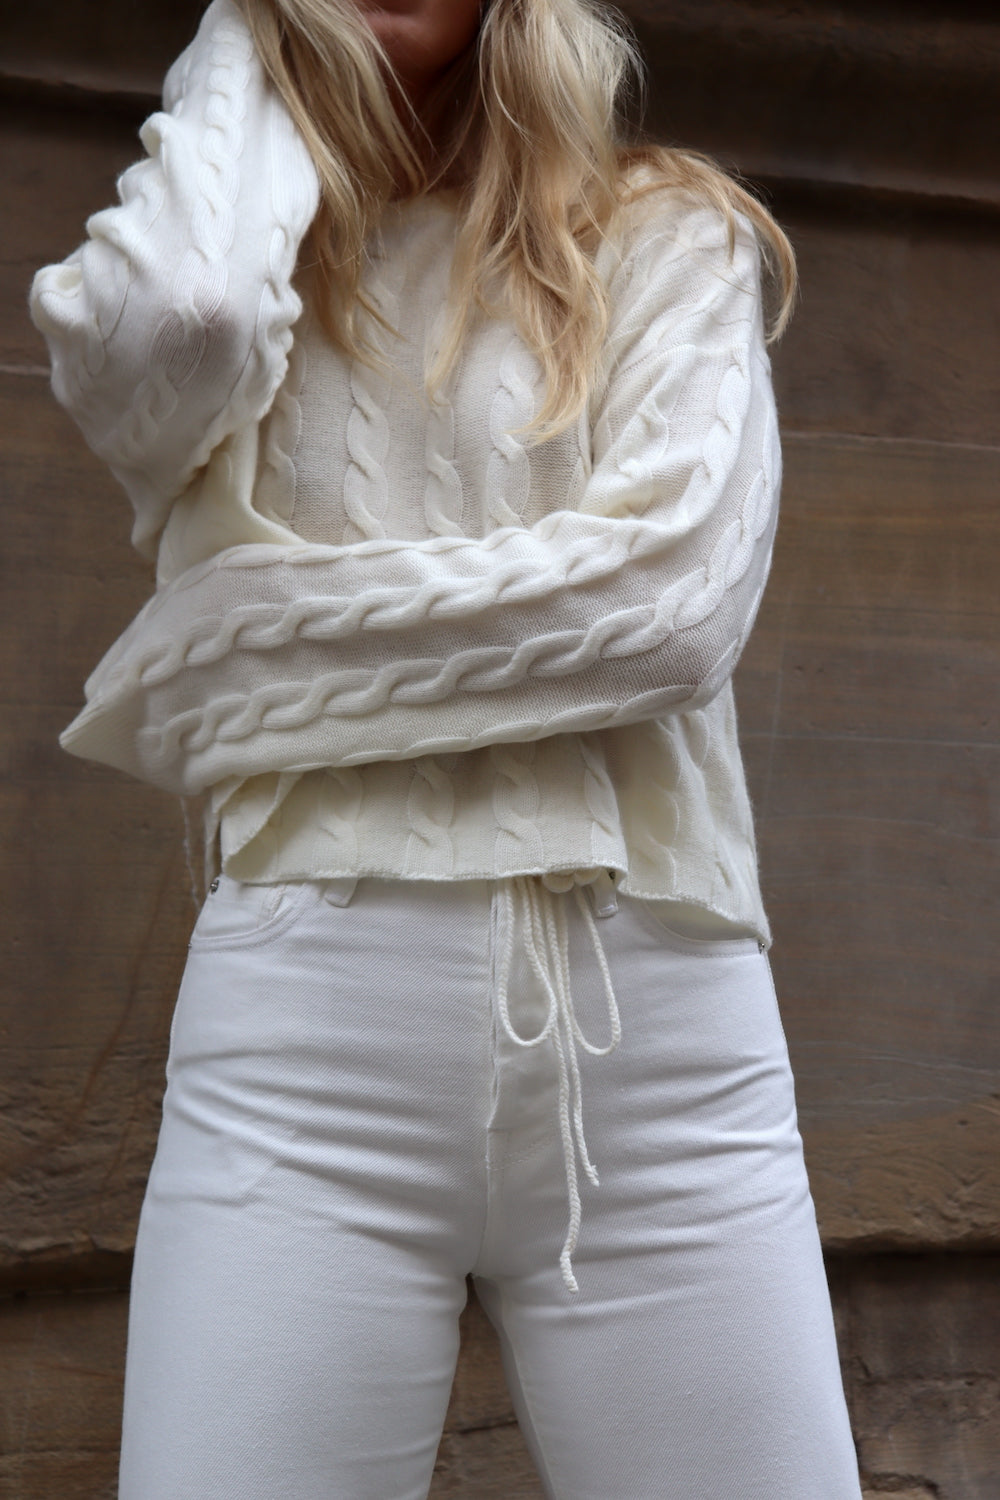 O'TAY Gertrud Sweater Bluser Off White